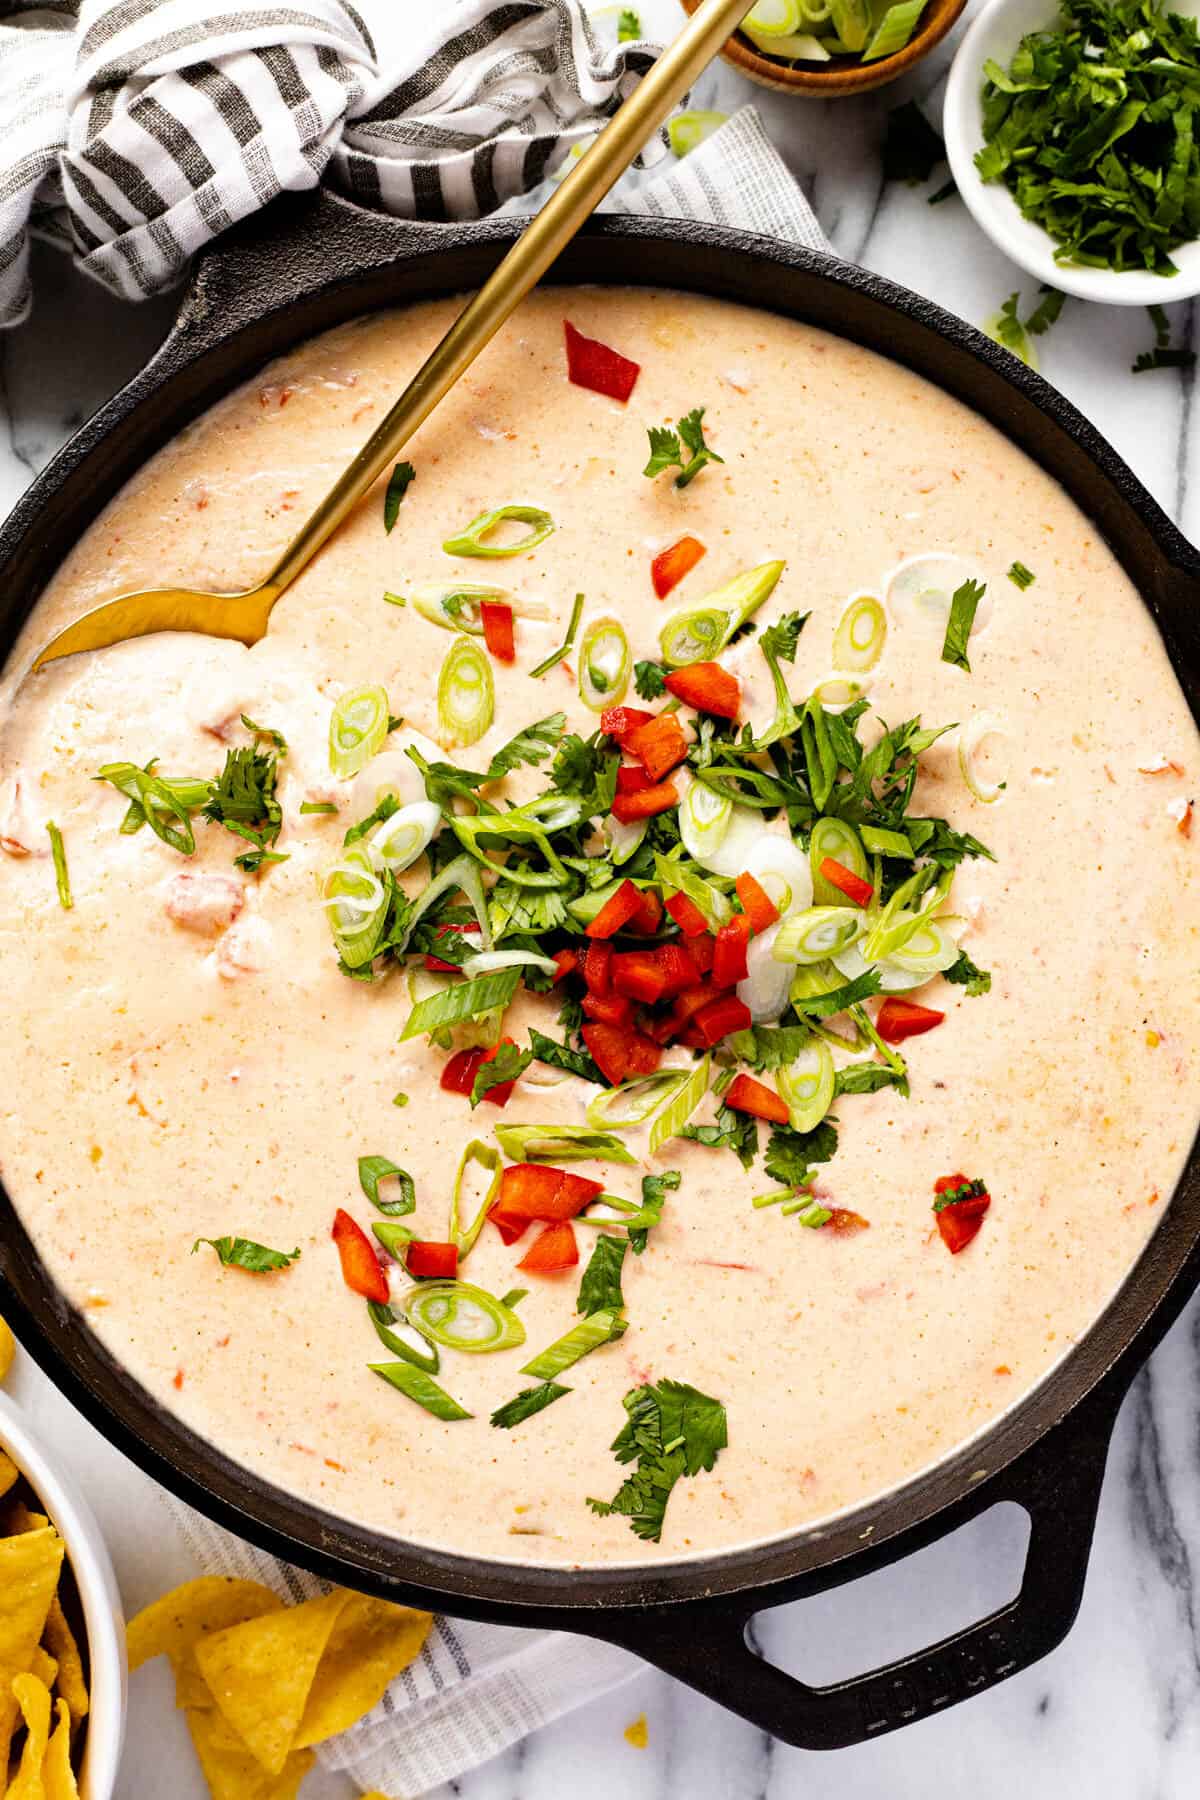 Large cast iron pan filled with homemade smoked queso dip garnished with green onion